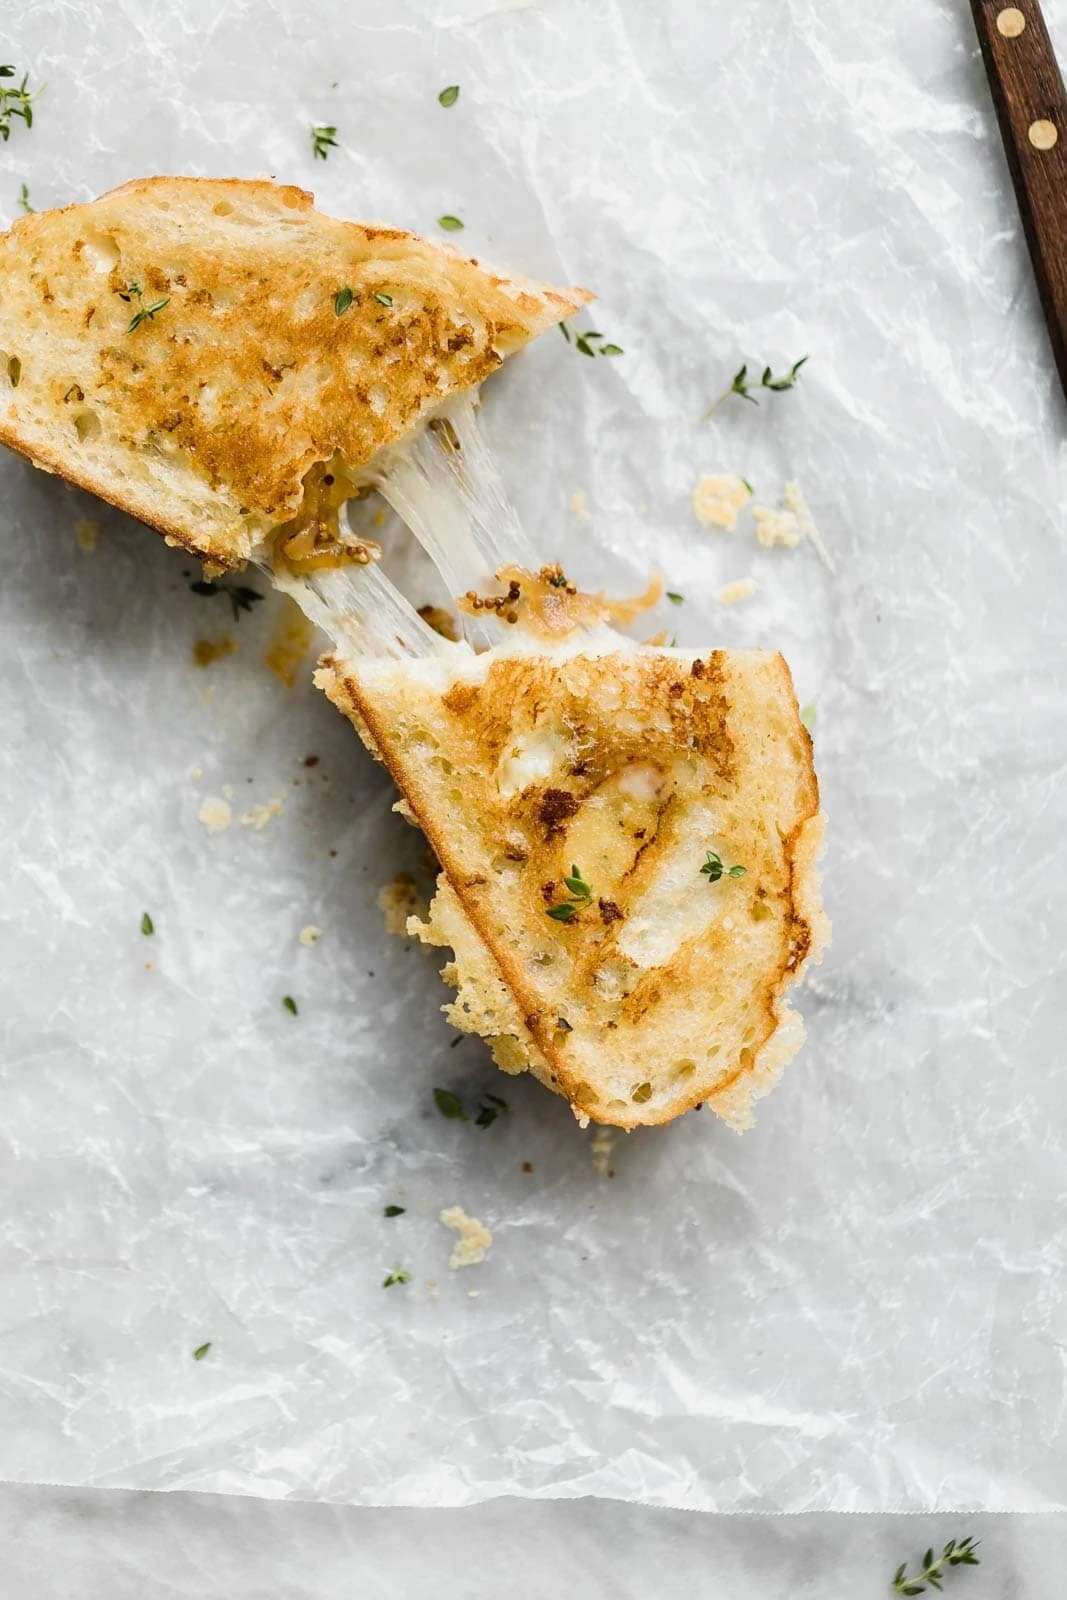 https://bromabakery.com/wp-content/uploads/2018/03/Caramelized-Onion-Grilled-Cheese-3-1067x1600.webp